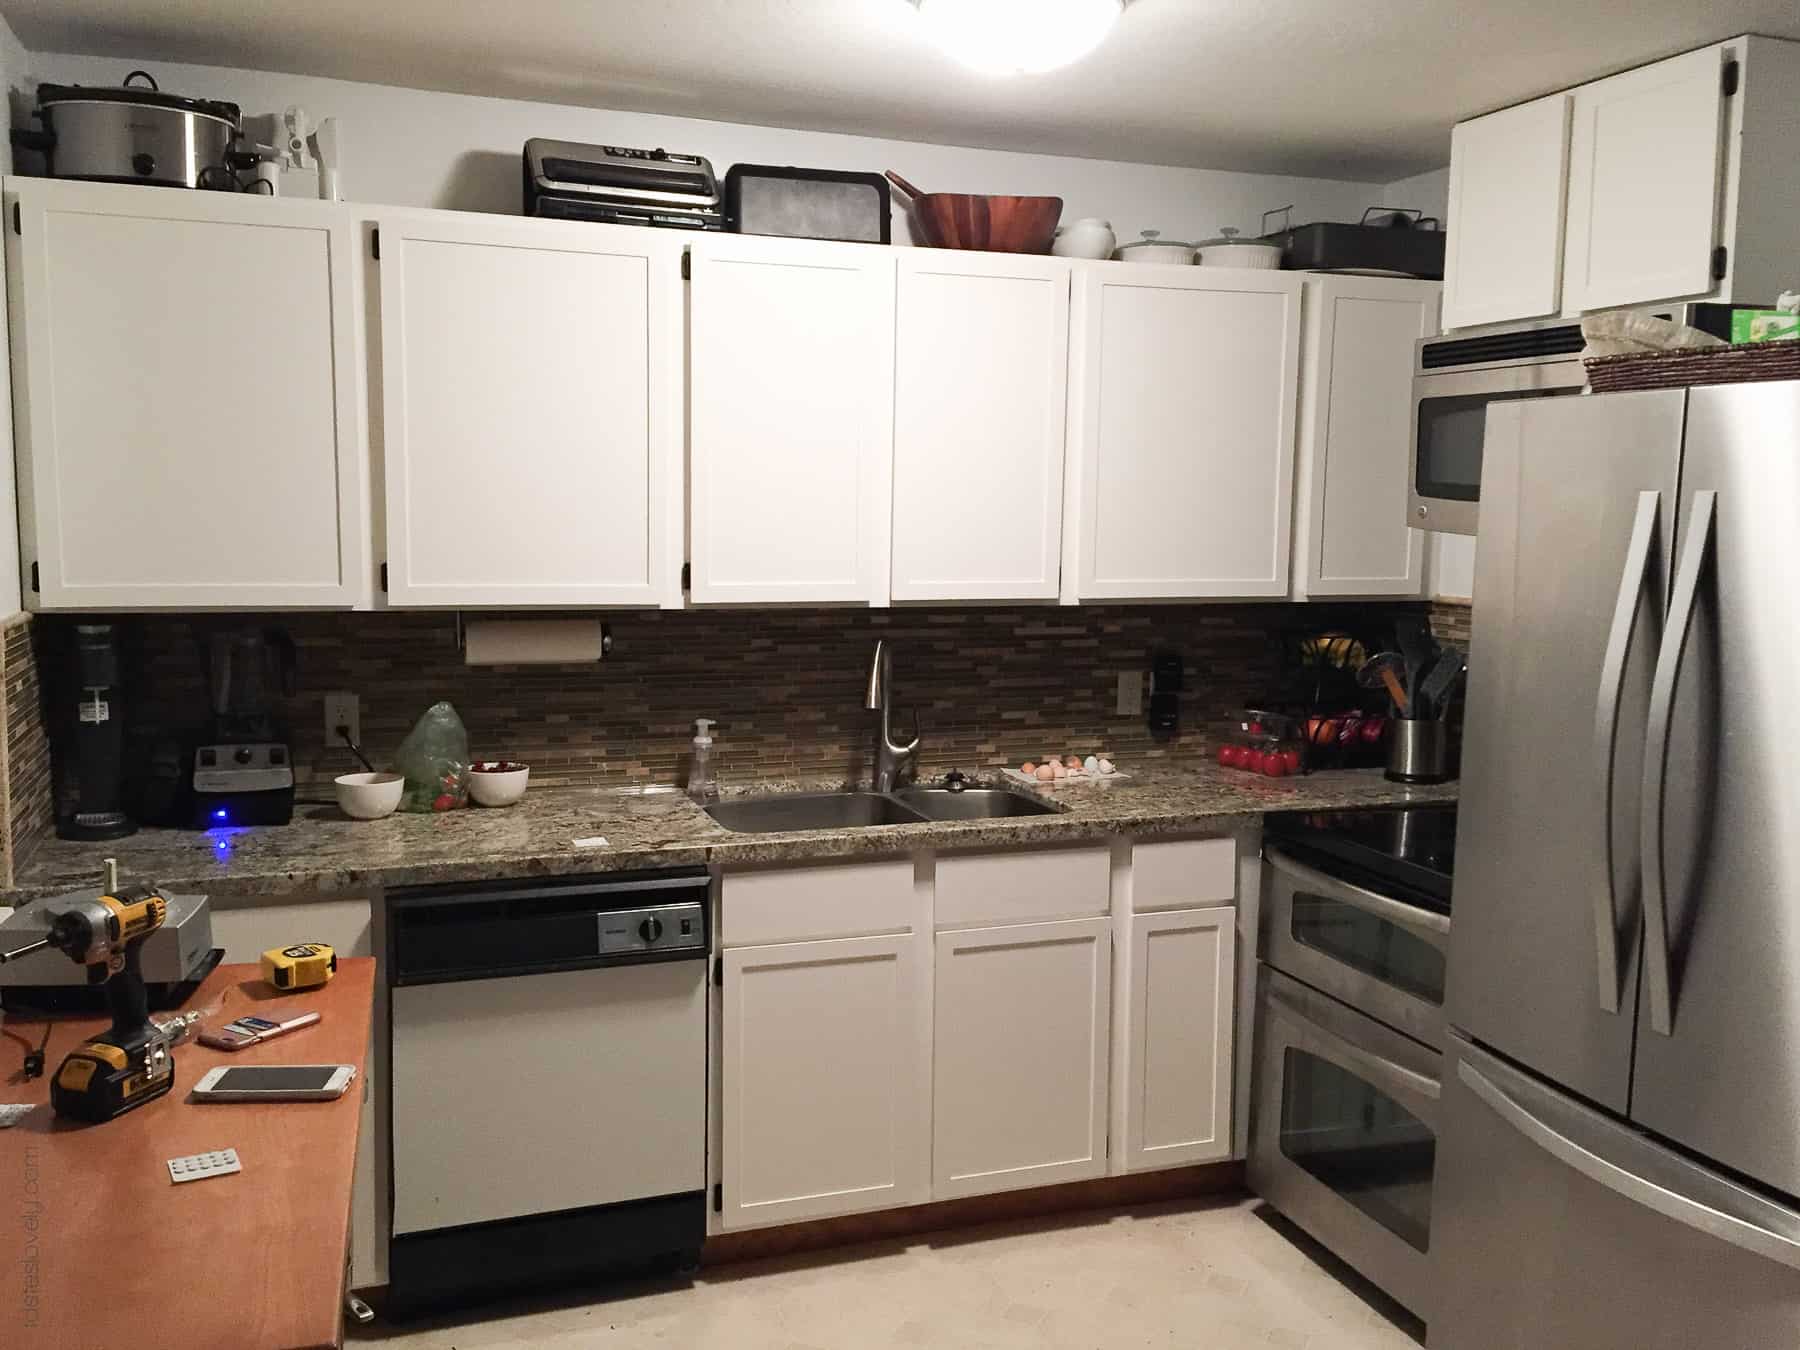 Our $281 DIY Kitchen Remodel - DIY painting oak cabinets white, adding wood trim to make shaker style cabinets, and adding hardware